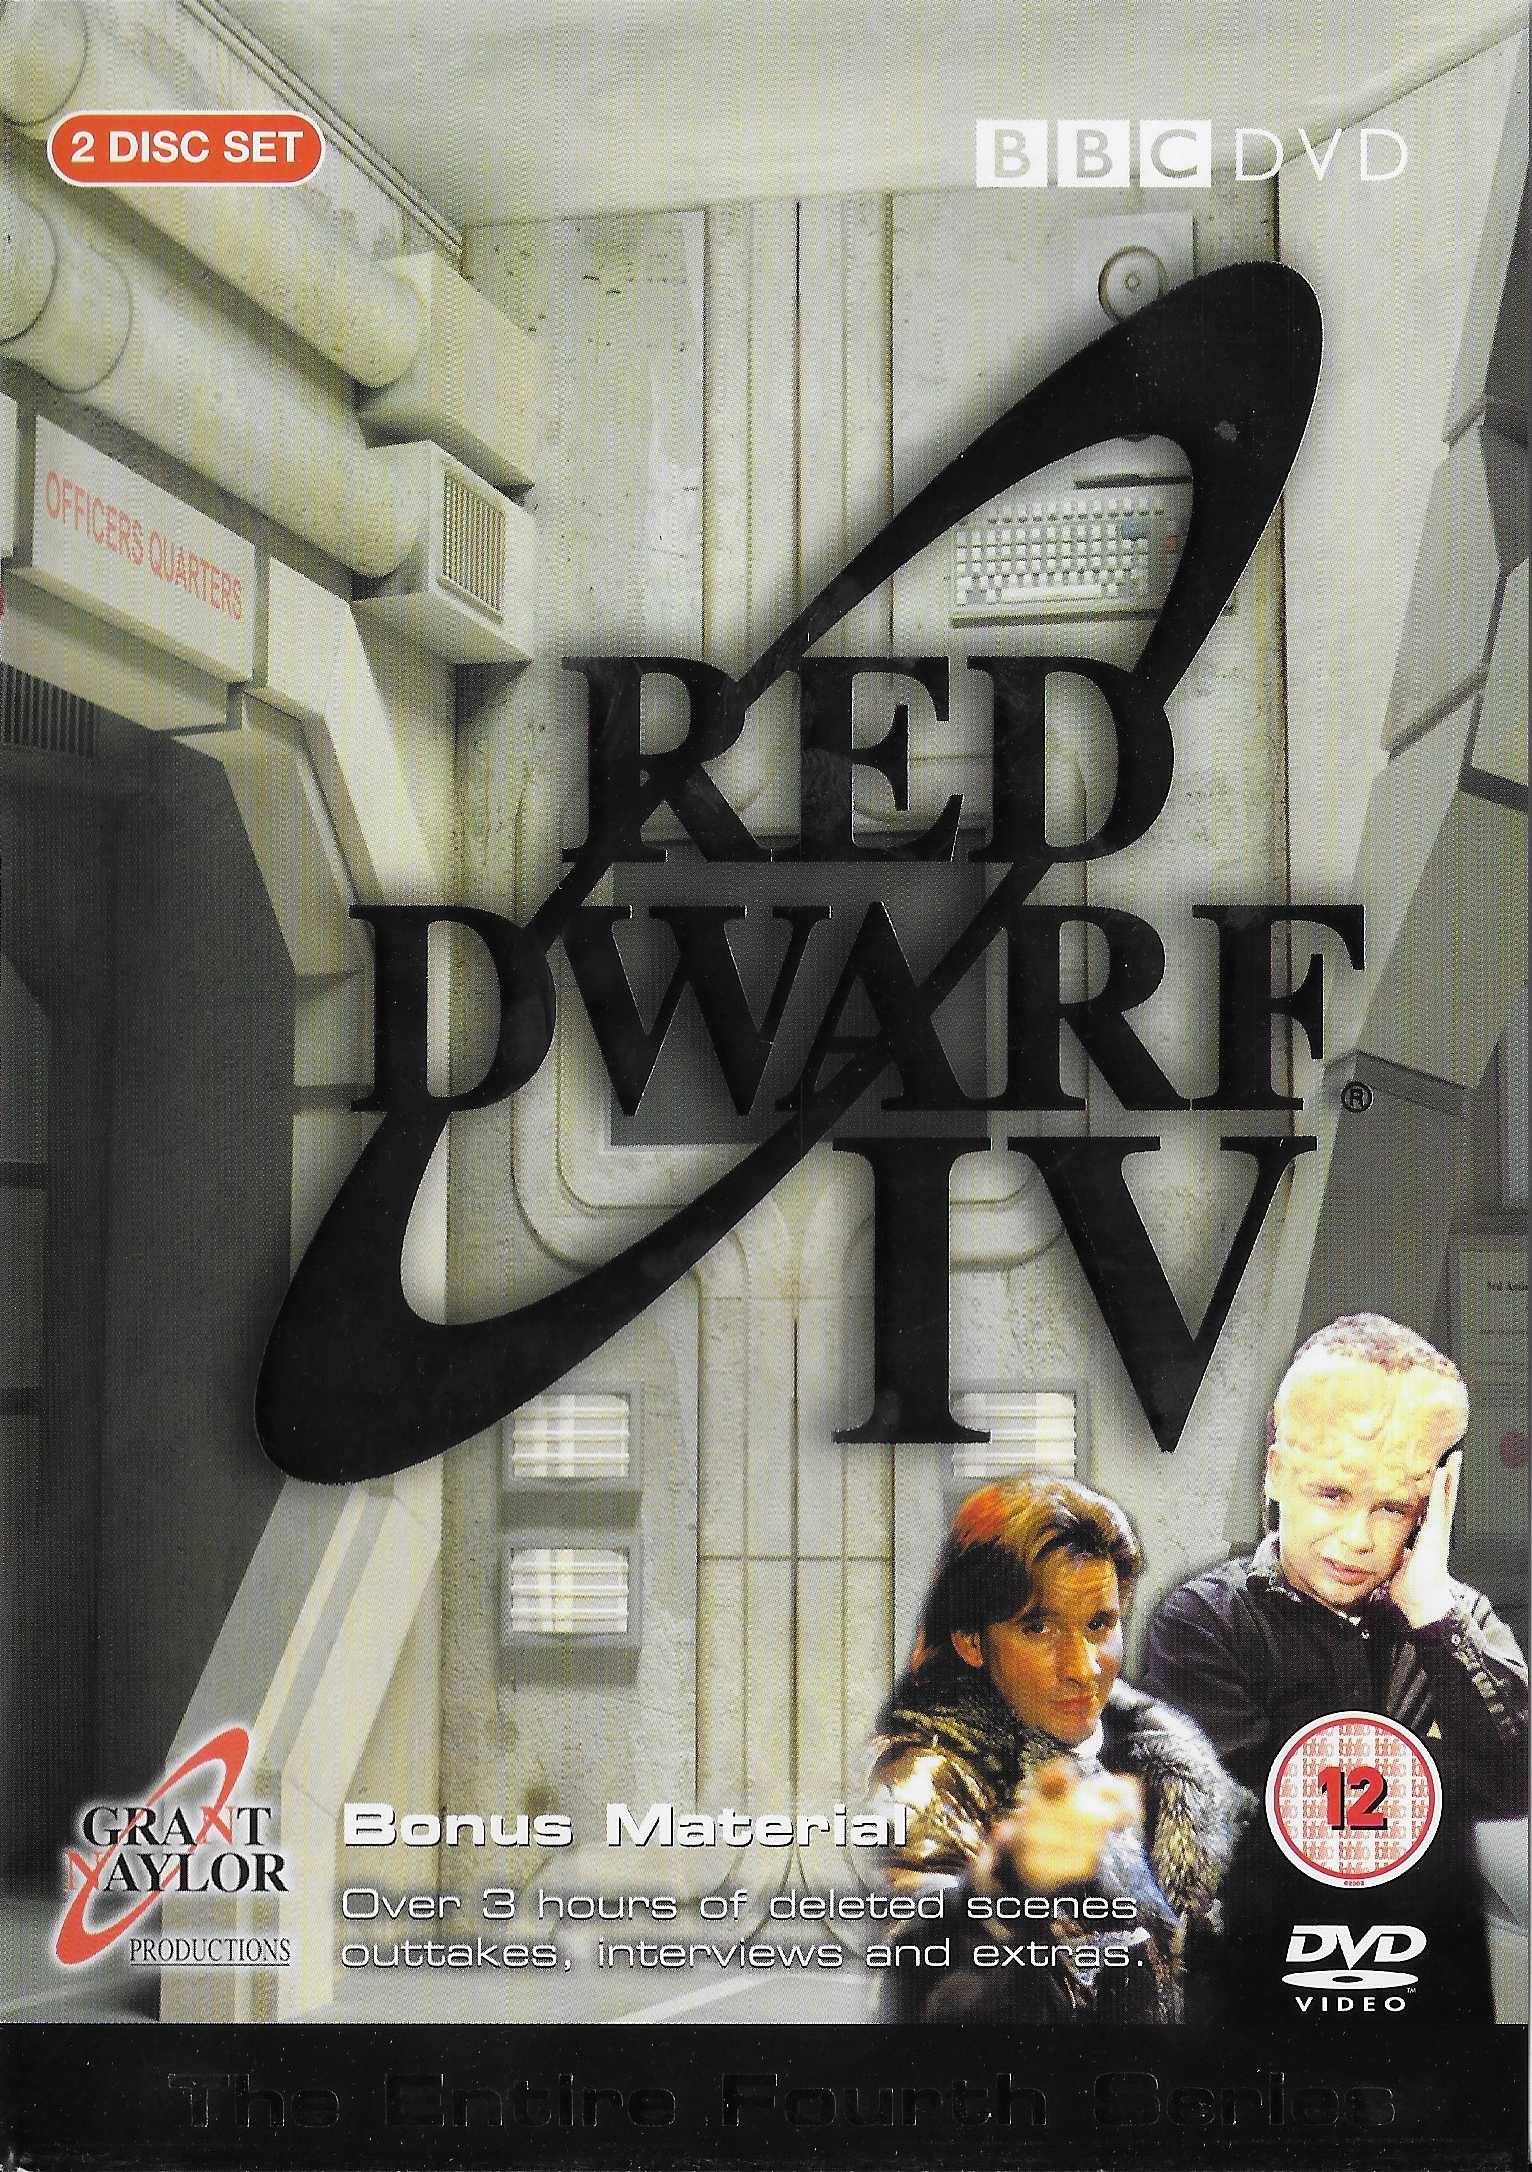 Picture of BBCDVD 1307 Red dwarf - Series IV by artist Rob Grant / Doug Naylor from the BBC dvds - Records and Tapes library